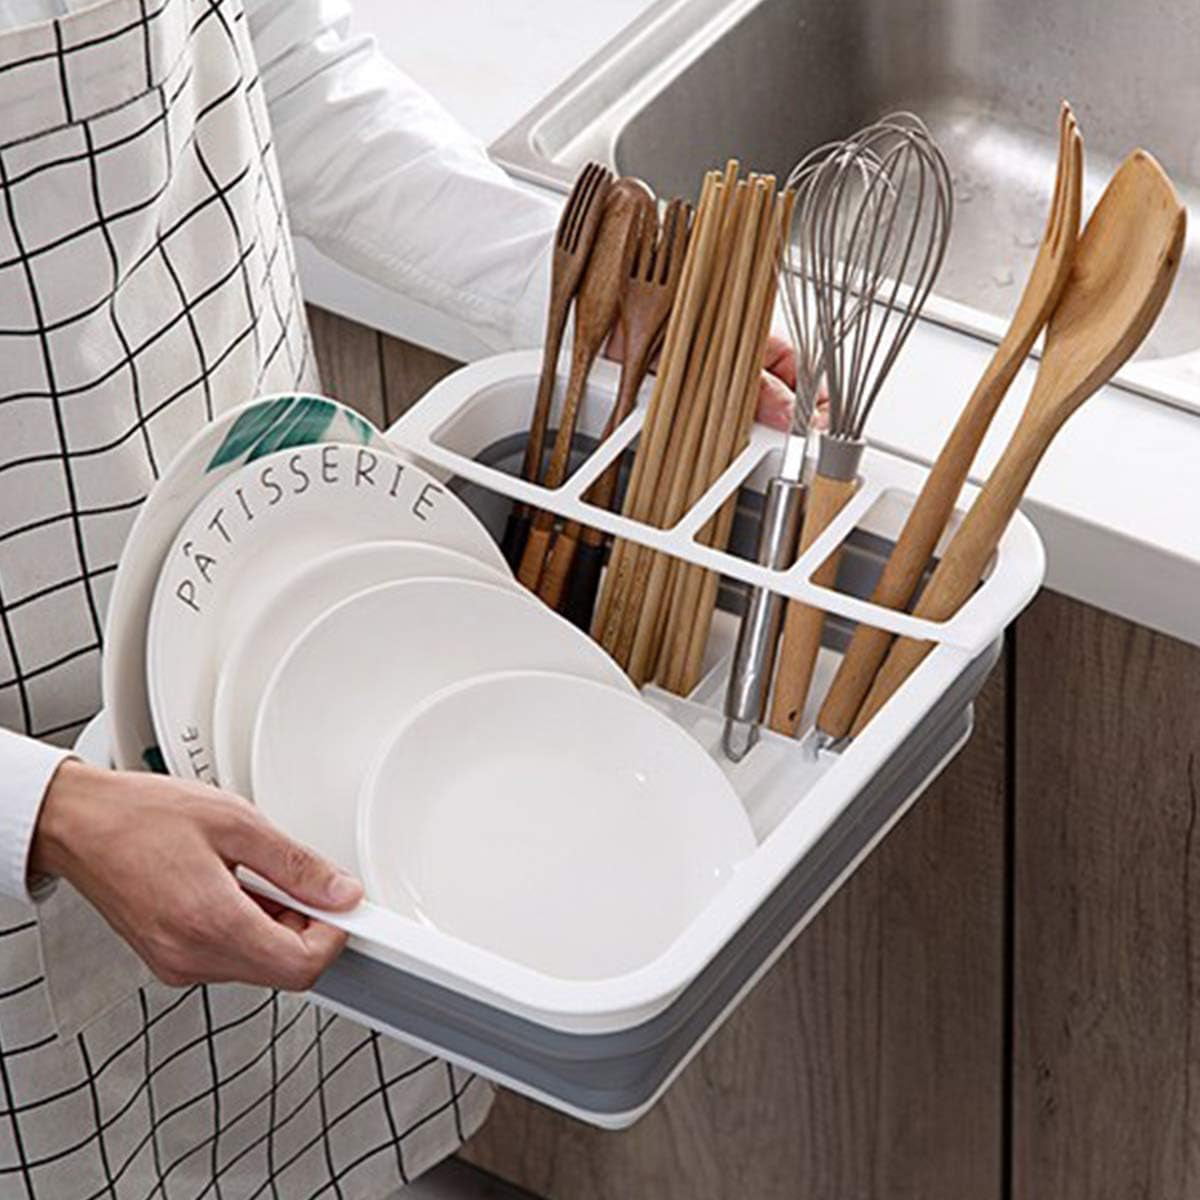 Ahyuan Collapsible Dish Drying Rack Portable Dinnerware Drainer Organizer  for Kitchen RV Campers Travel Trailers Space Saving Kitchen Storage Rack